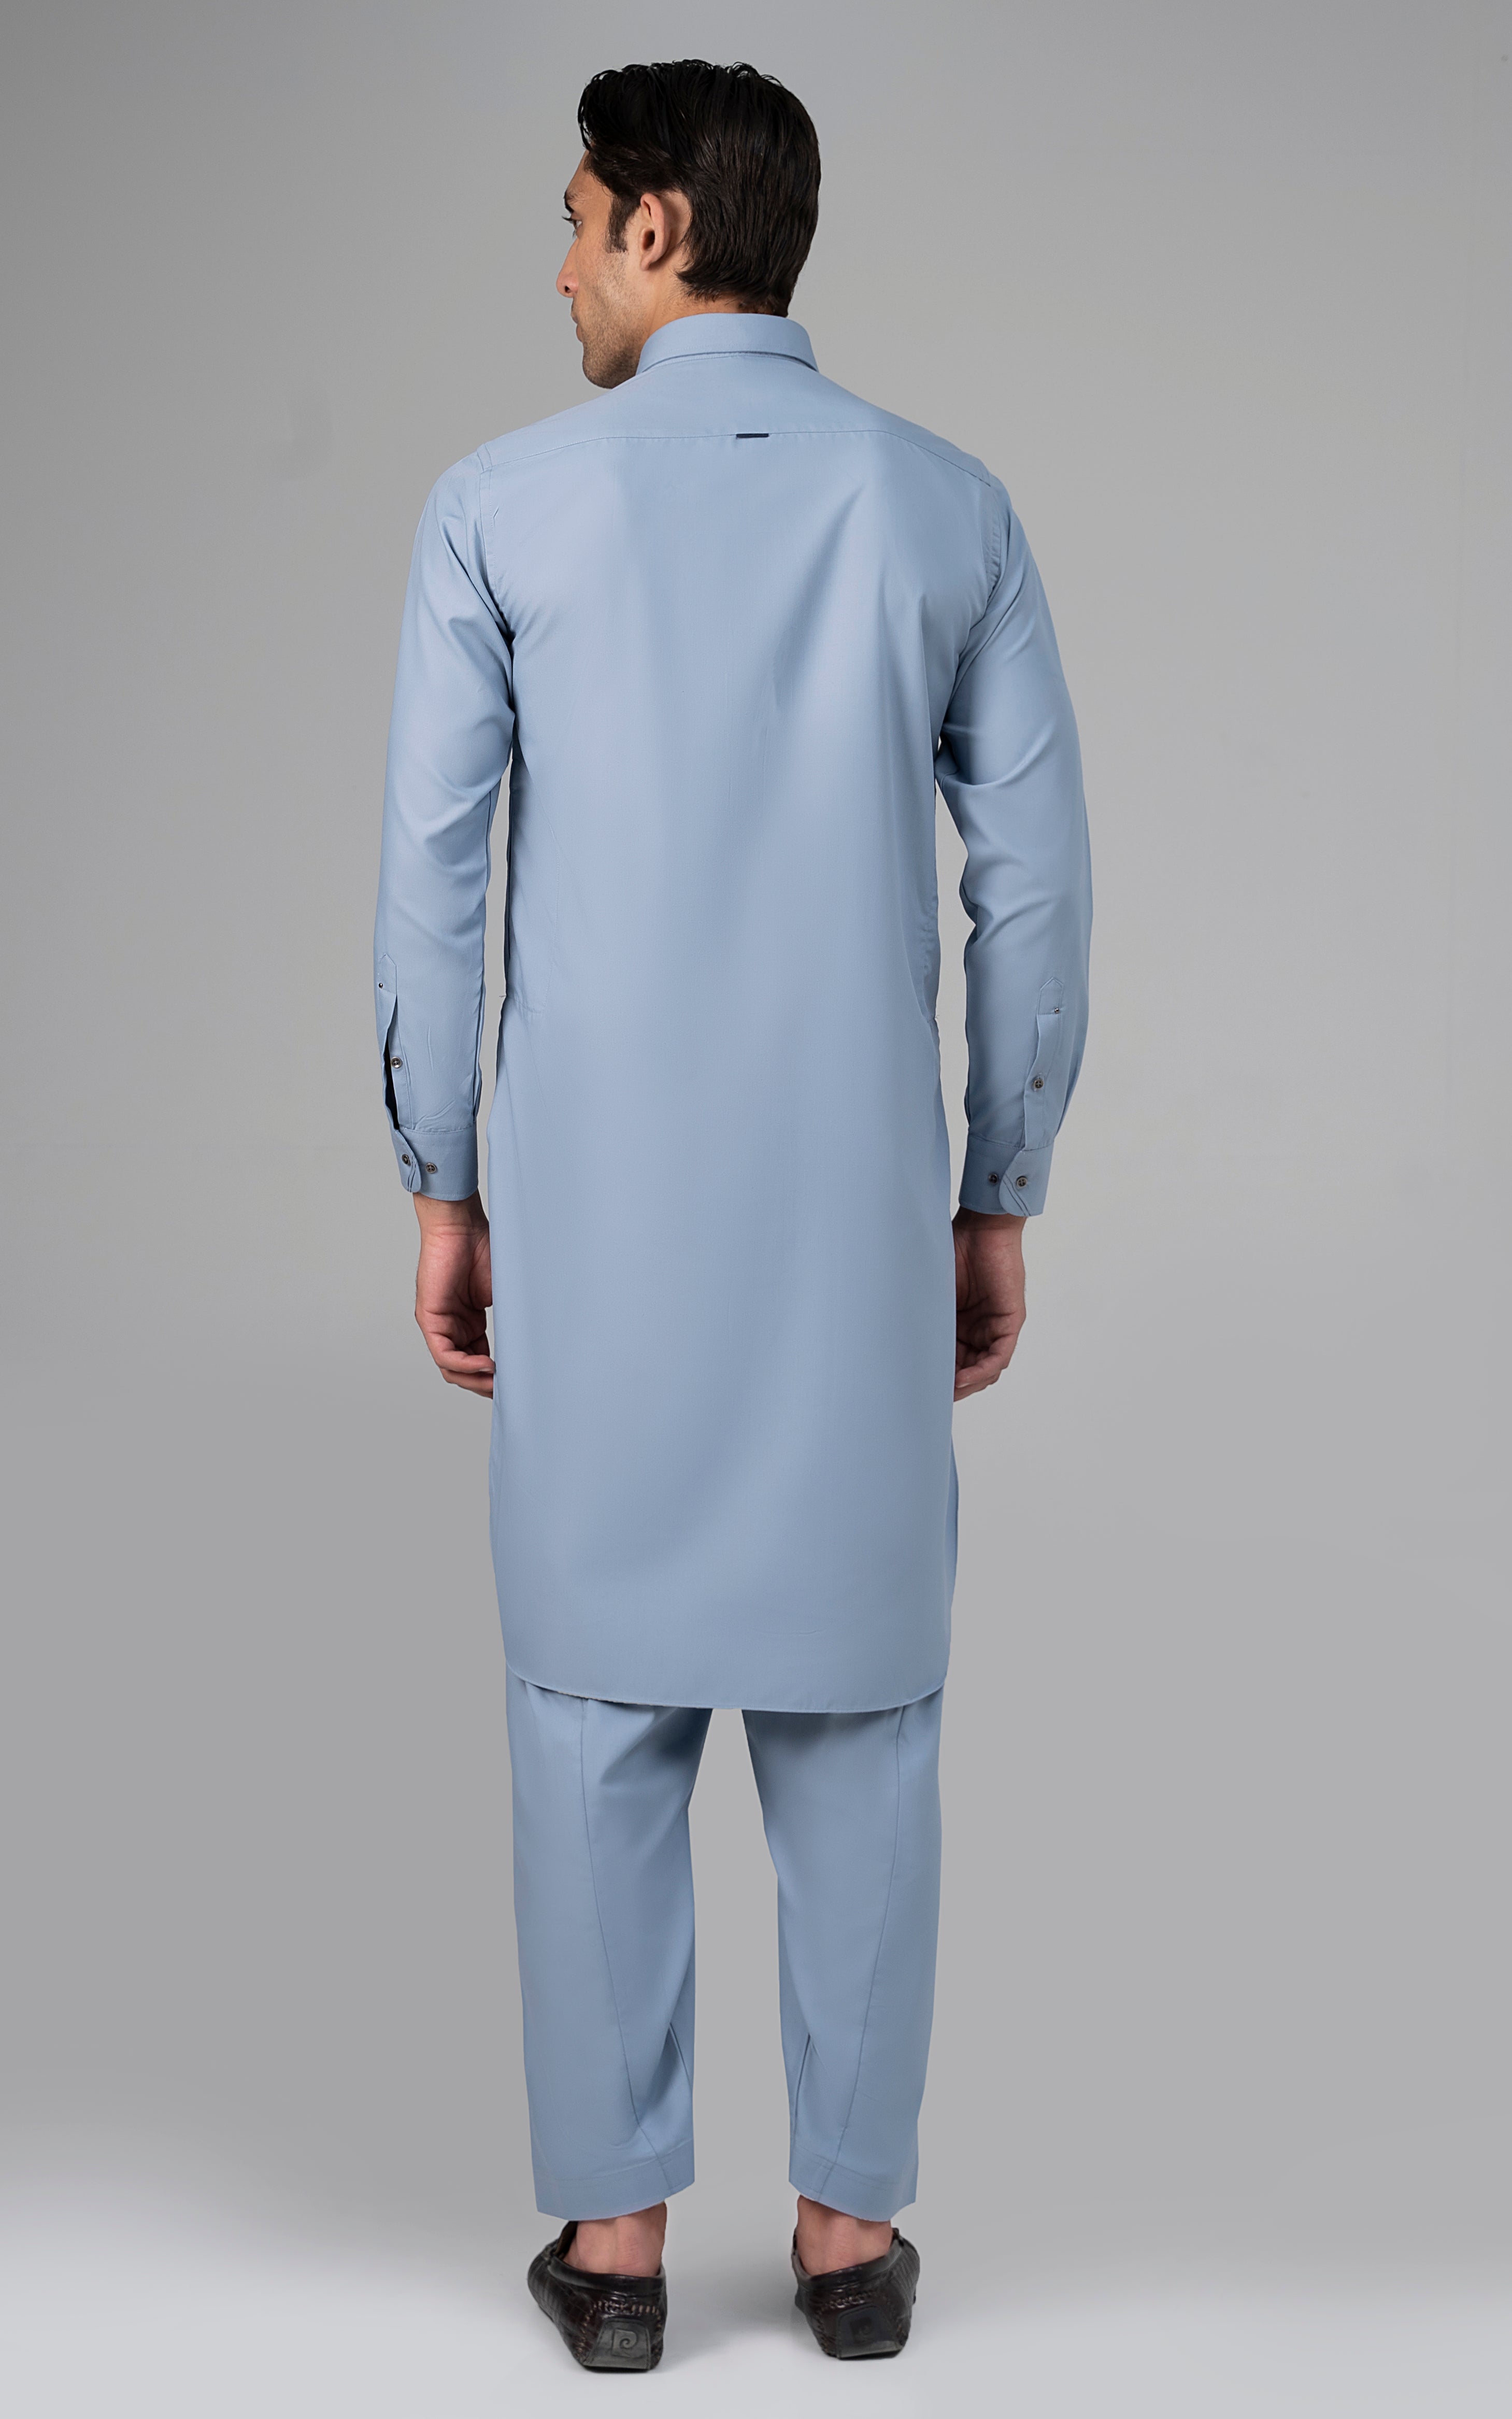 WASH & WEAR - CLASSIC COLLECTION LIGHT BLUE